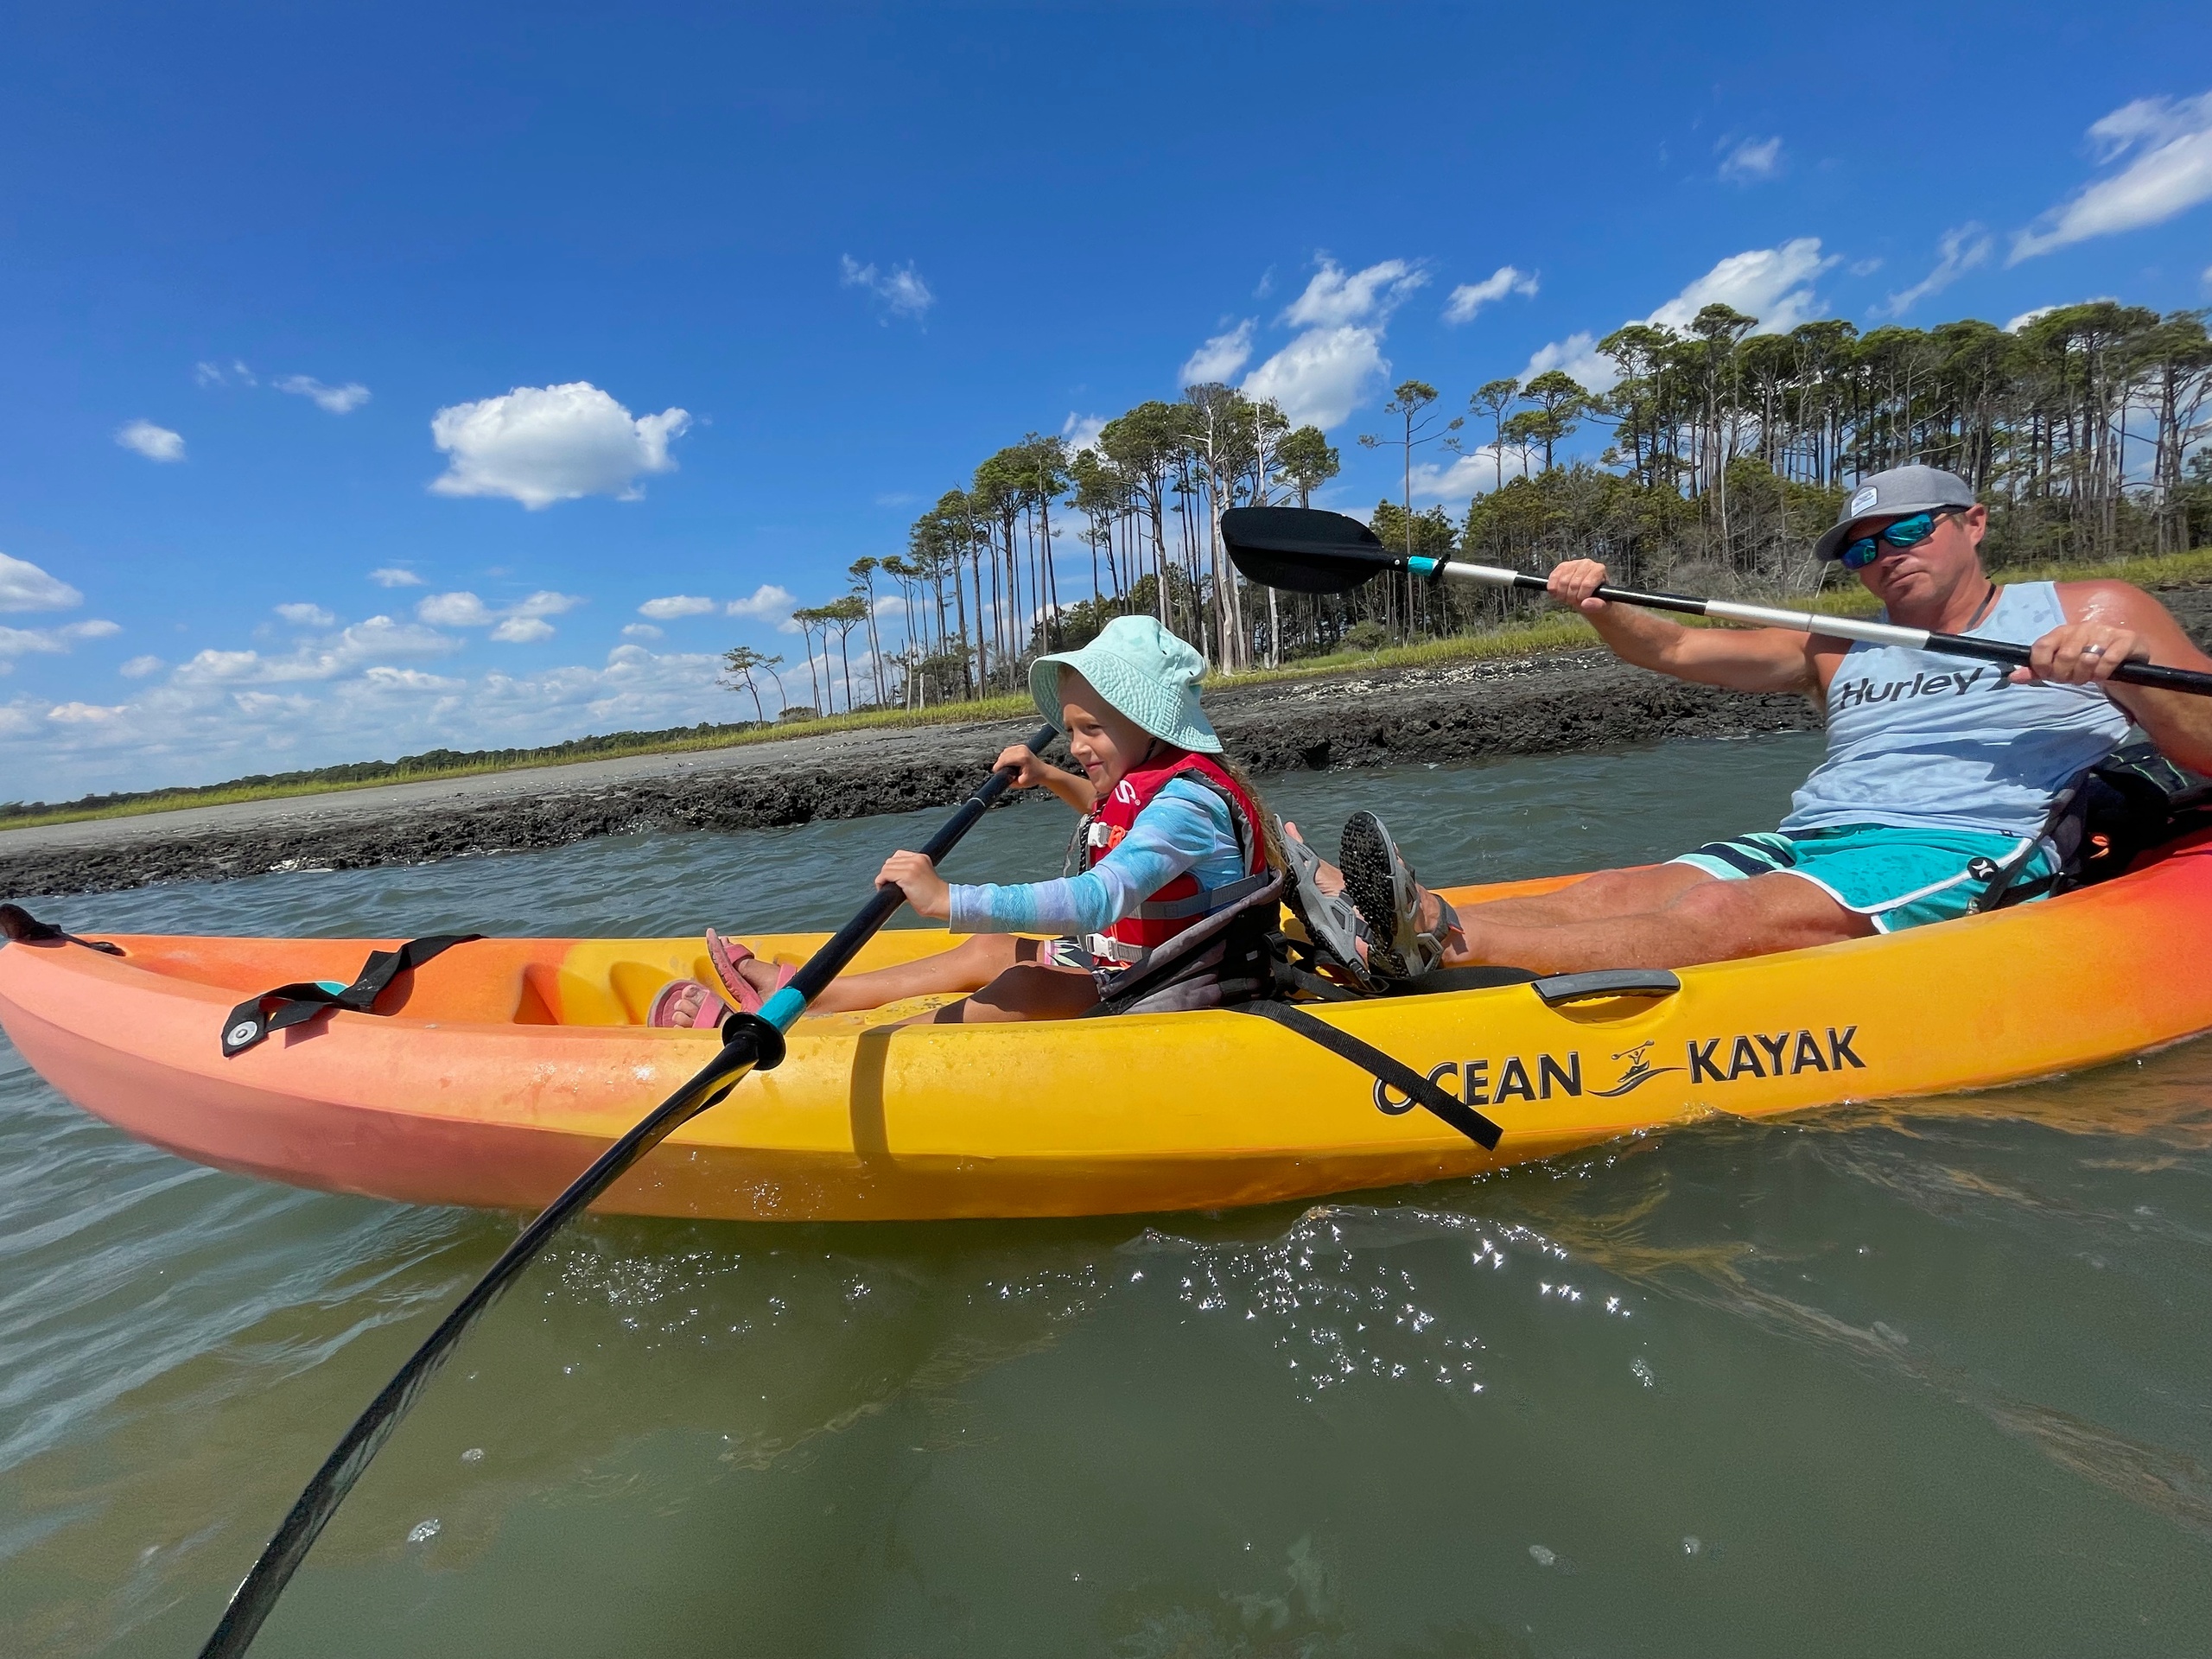 Rent a Kayak or SUP in North Myrtle Beach